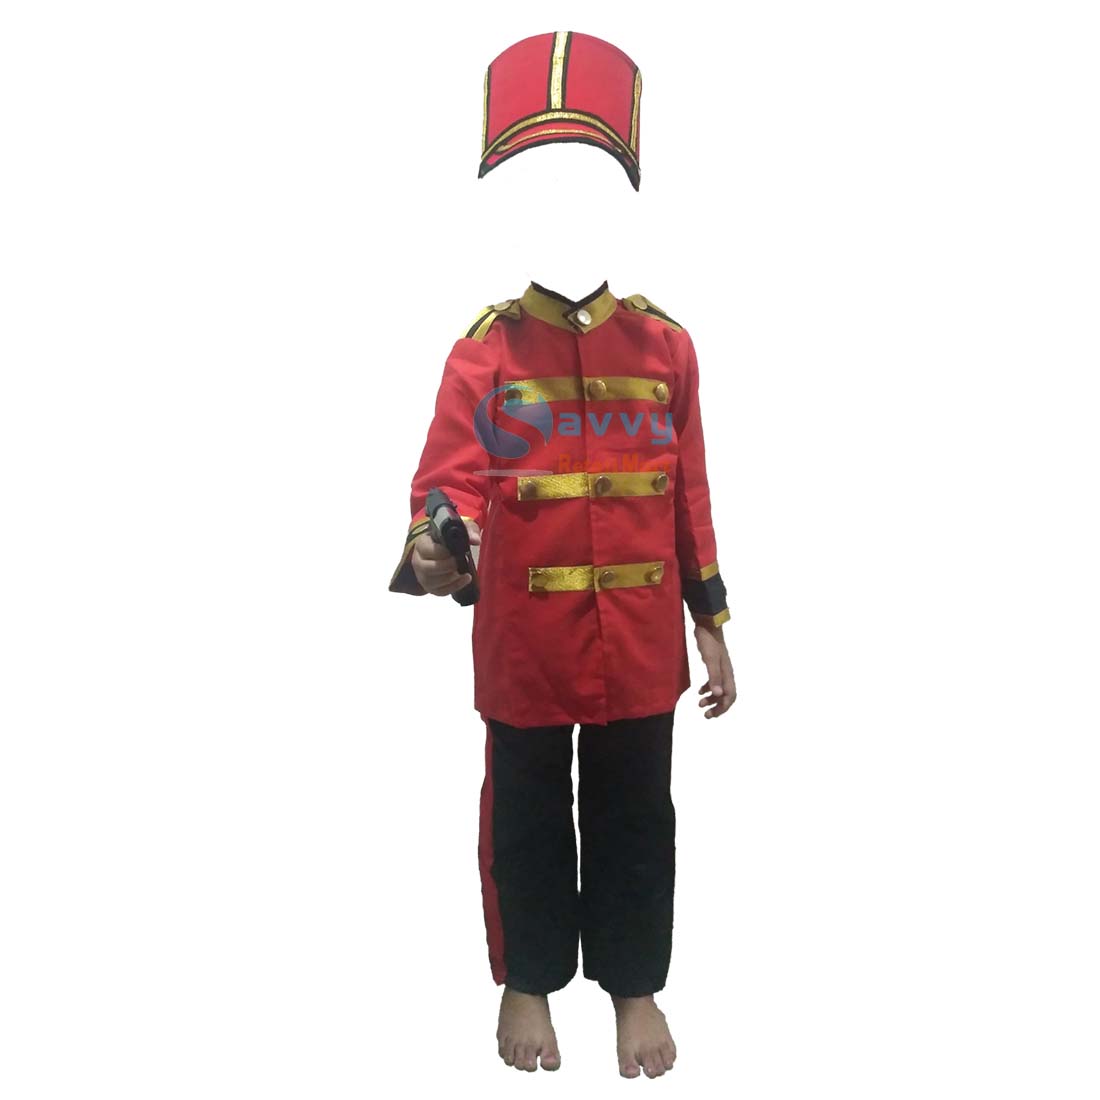 Top Costumes On Rent For Drama in Mangal Pandey Road - Best Costume Hire  For Drama Lucknow - Justdial